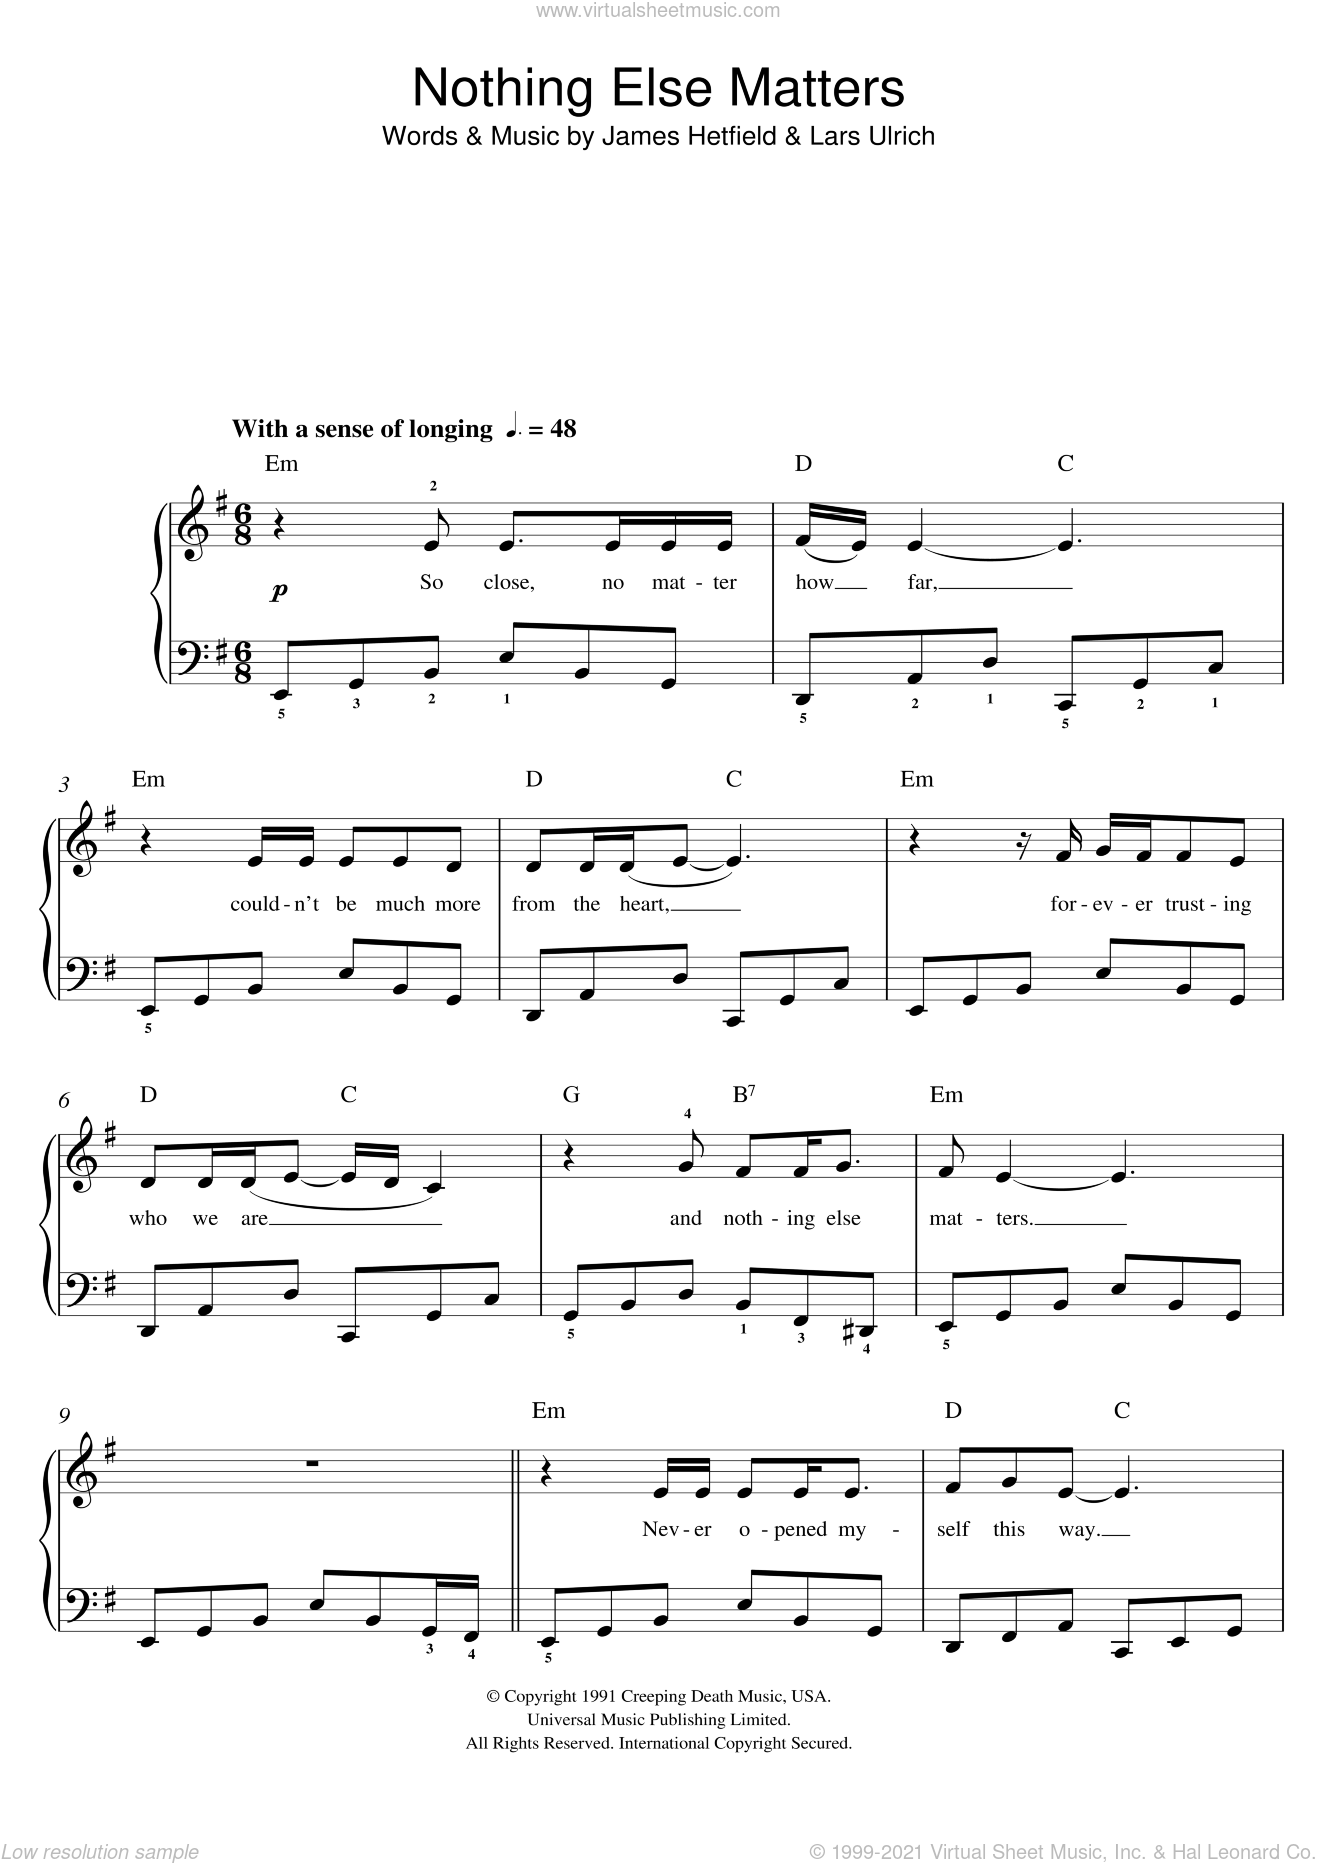 Super Metallica - Nothing Else Matters sheet music for piano solo (beginners) EH-12